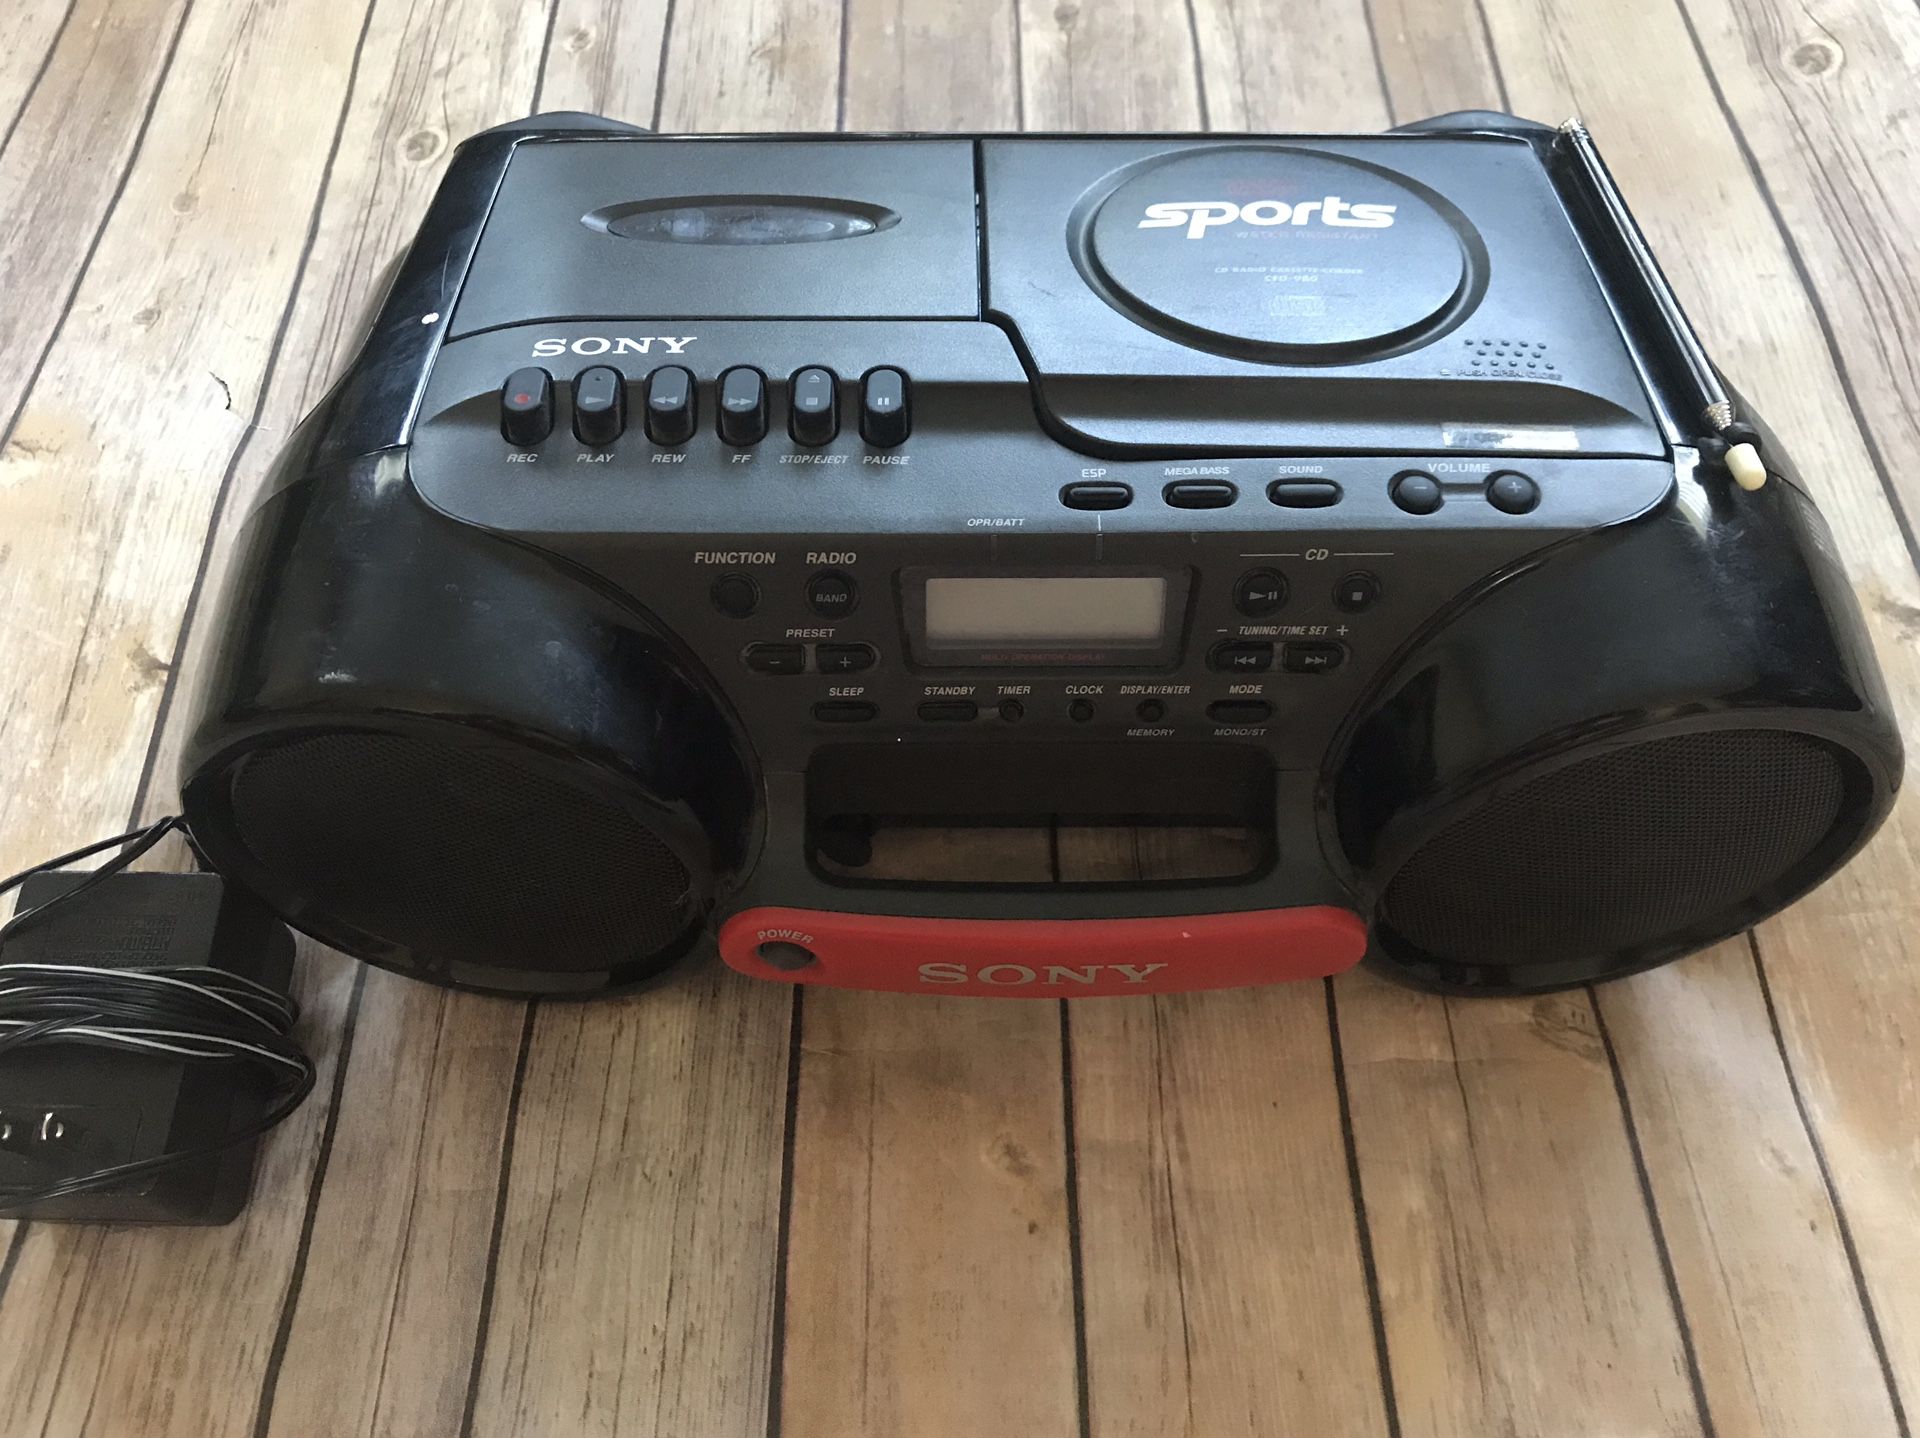 Sony CFD-980 CD/Cassette/Radio Boombox Water Resistant